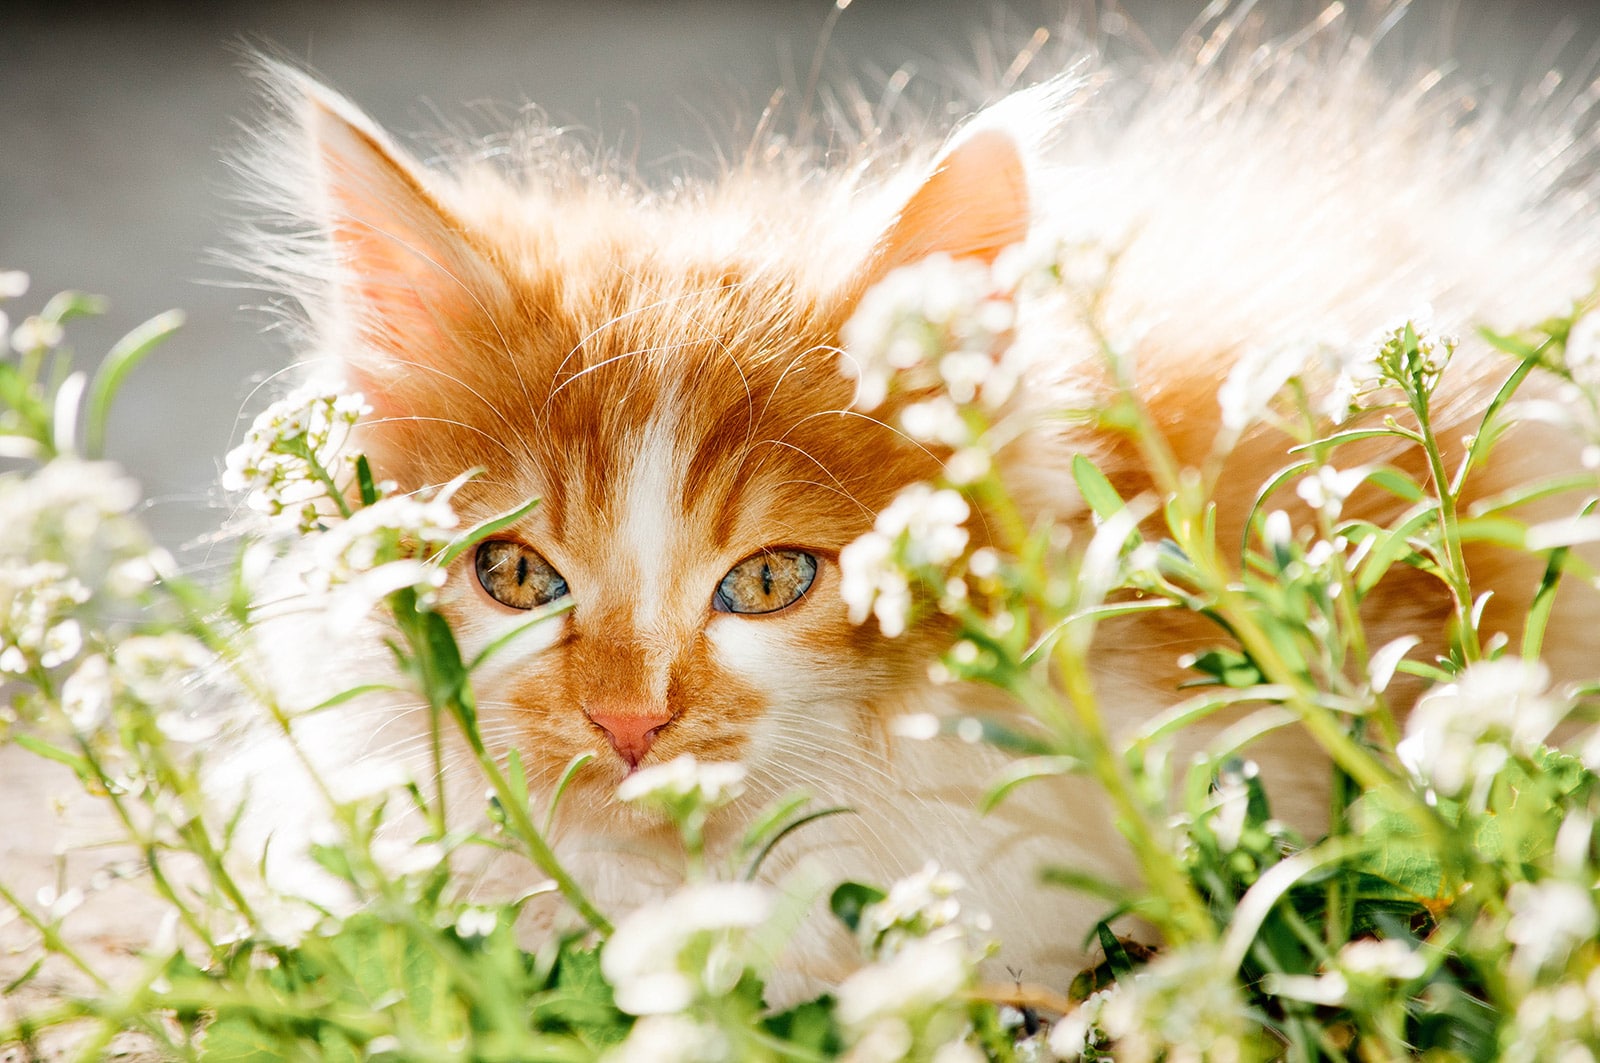 Close-up of an orange and white cat peering out from behind a flowering shrub